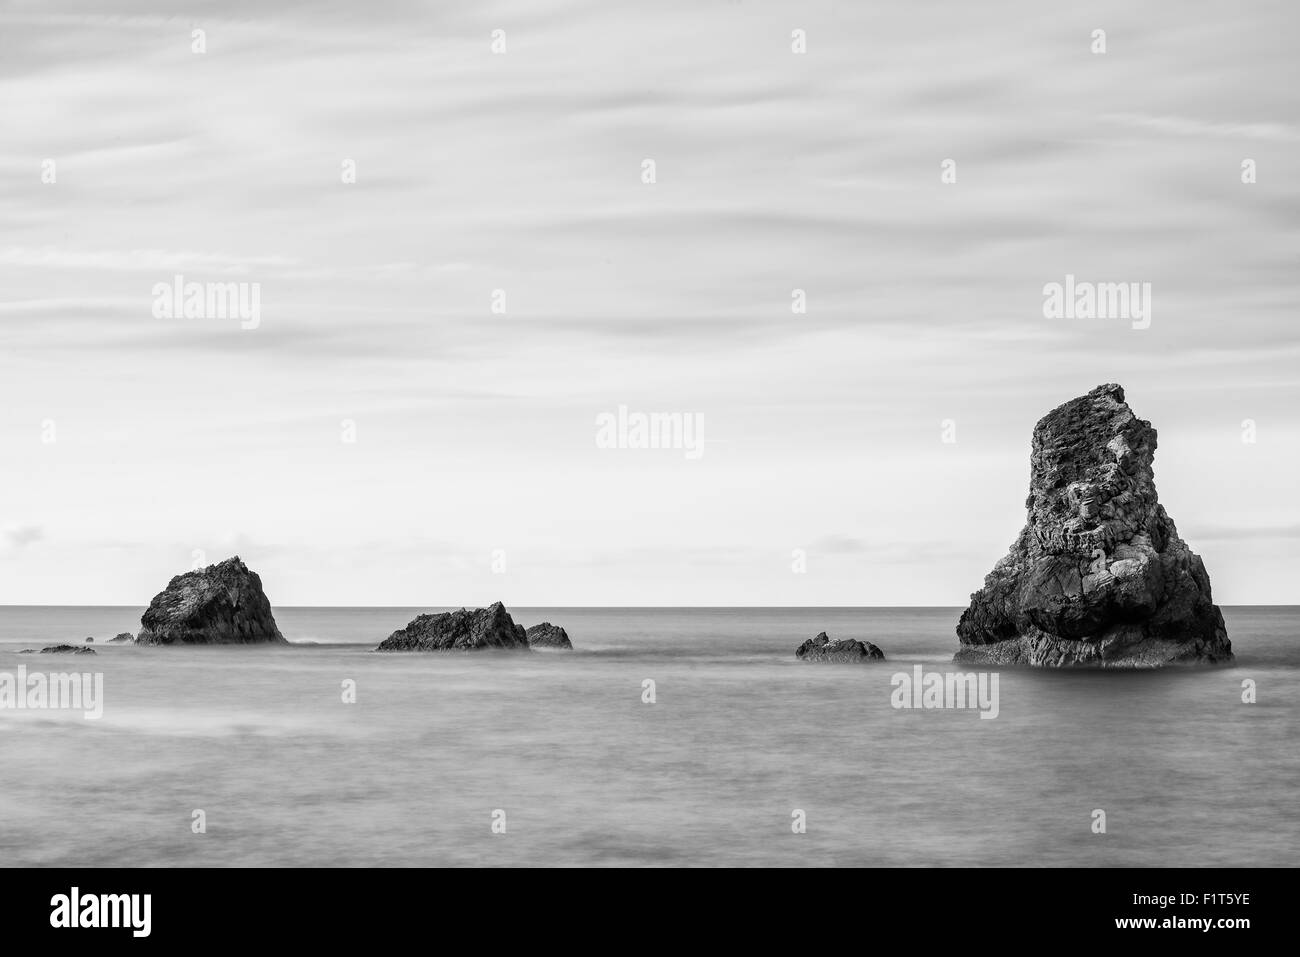 Beautiful long exposure peaceful landscape of rocks in sea in black and white Stock Photo